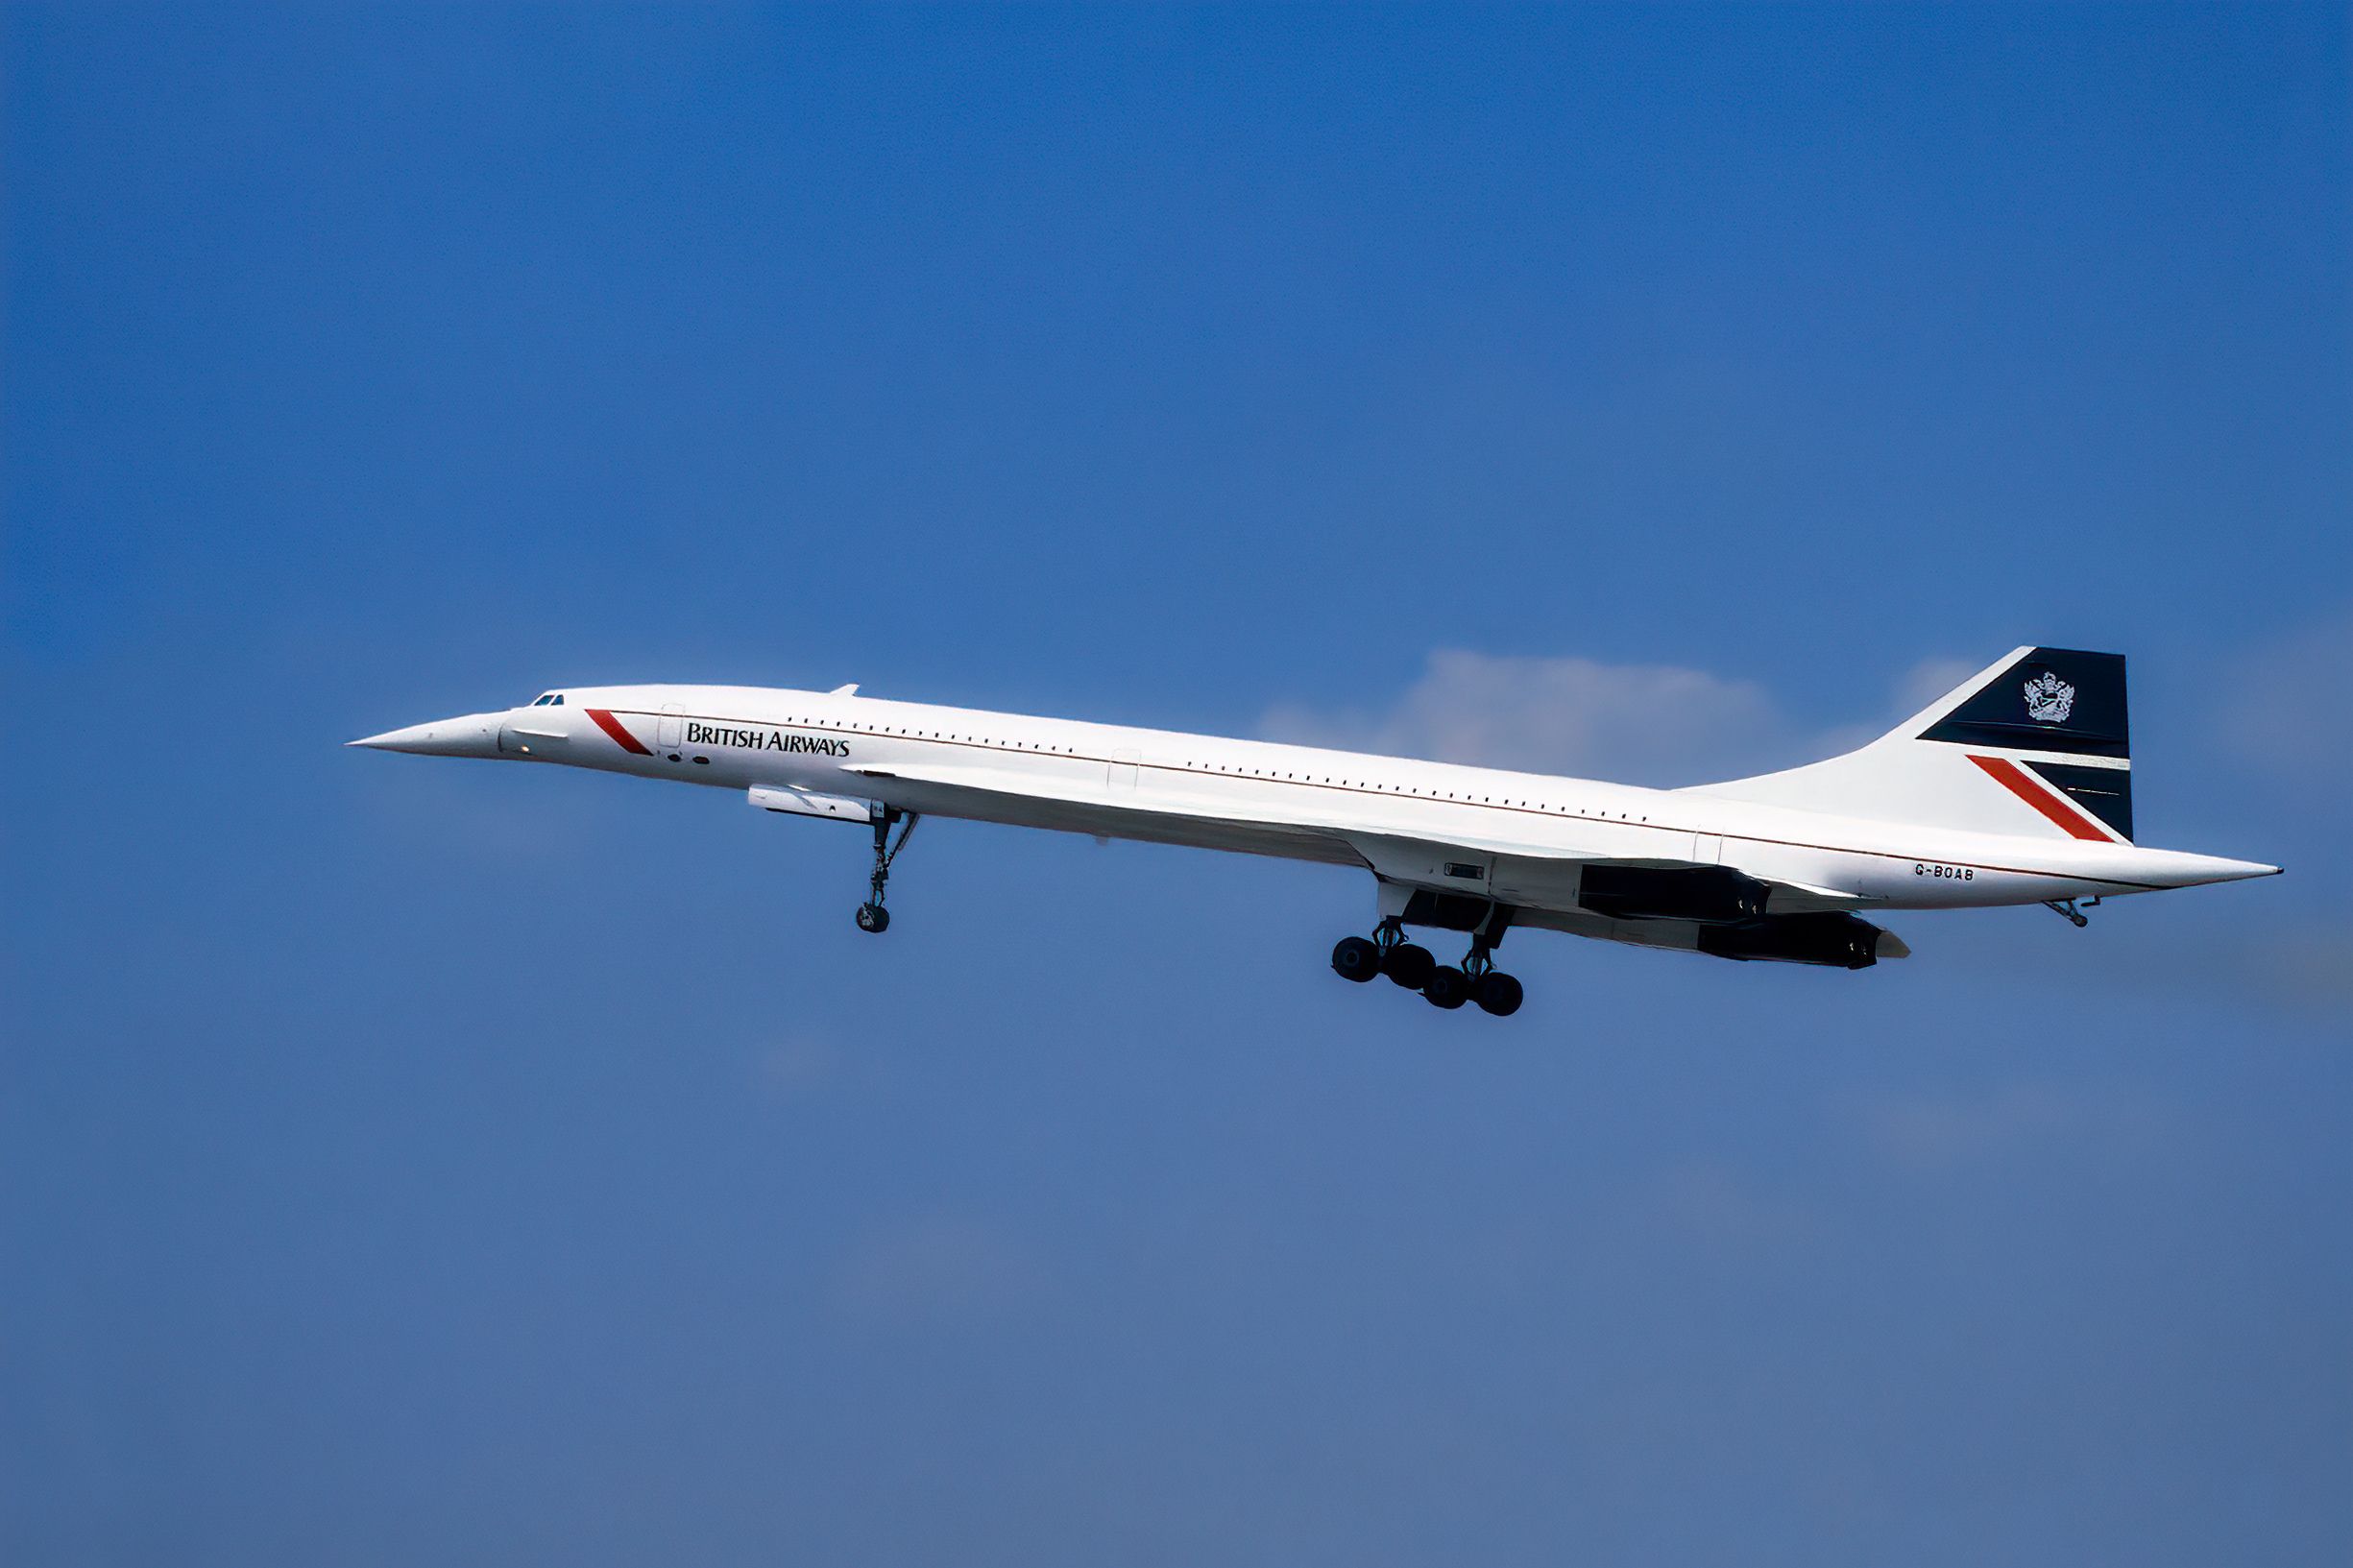 A British Airways Concorde taking off with landing gear still extended .